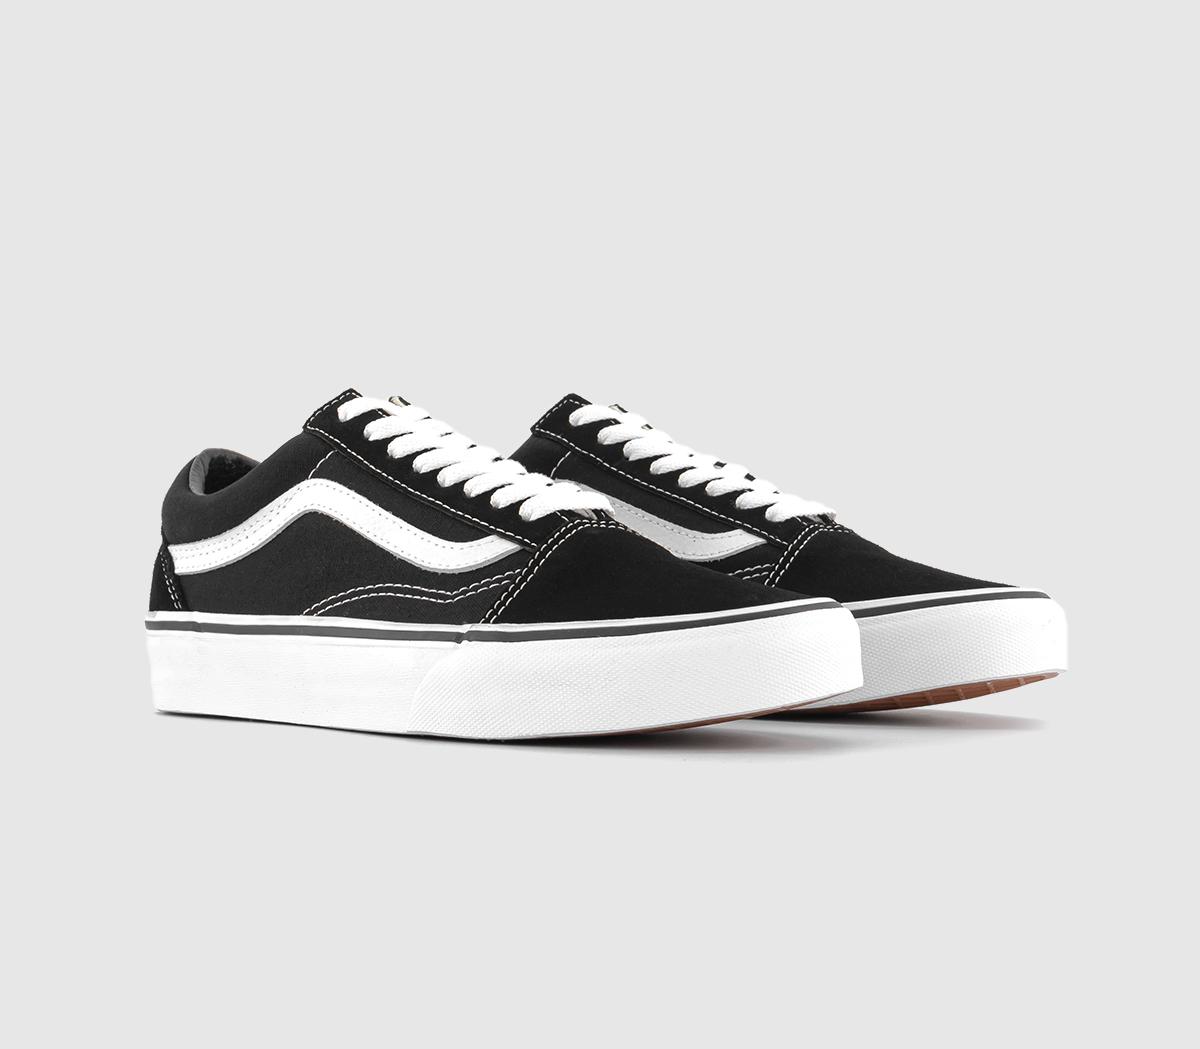 Vans Old Skool Kids Black And White Canvas Trainers, Size: 5.5